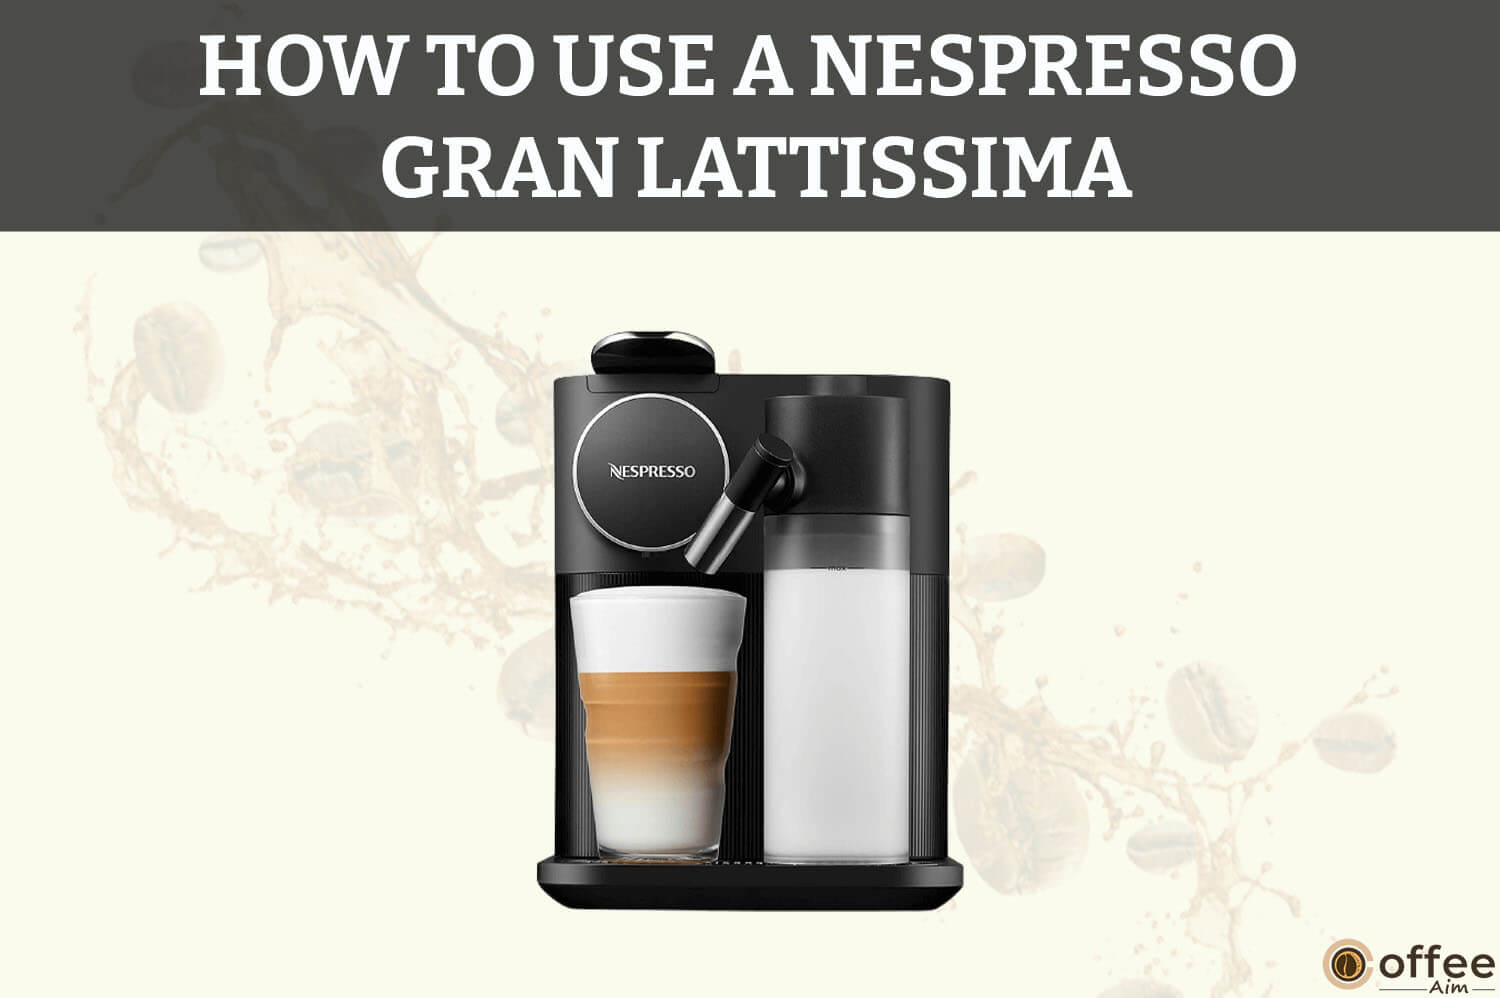 Featured image for the article "How to Use A Nespresso Gran Lattissima"